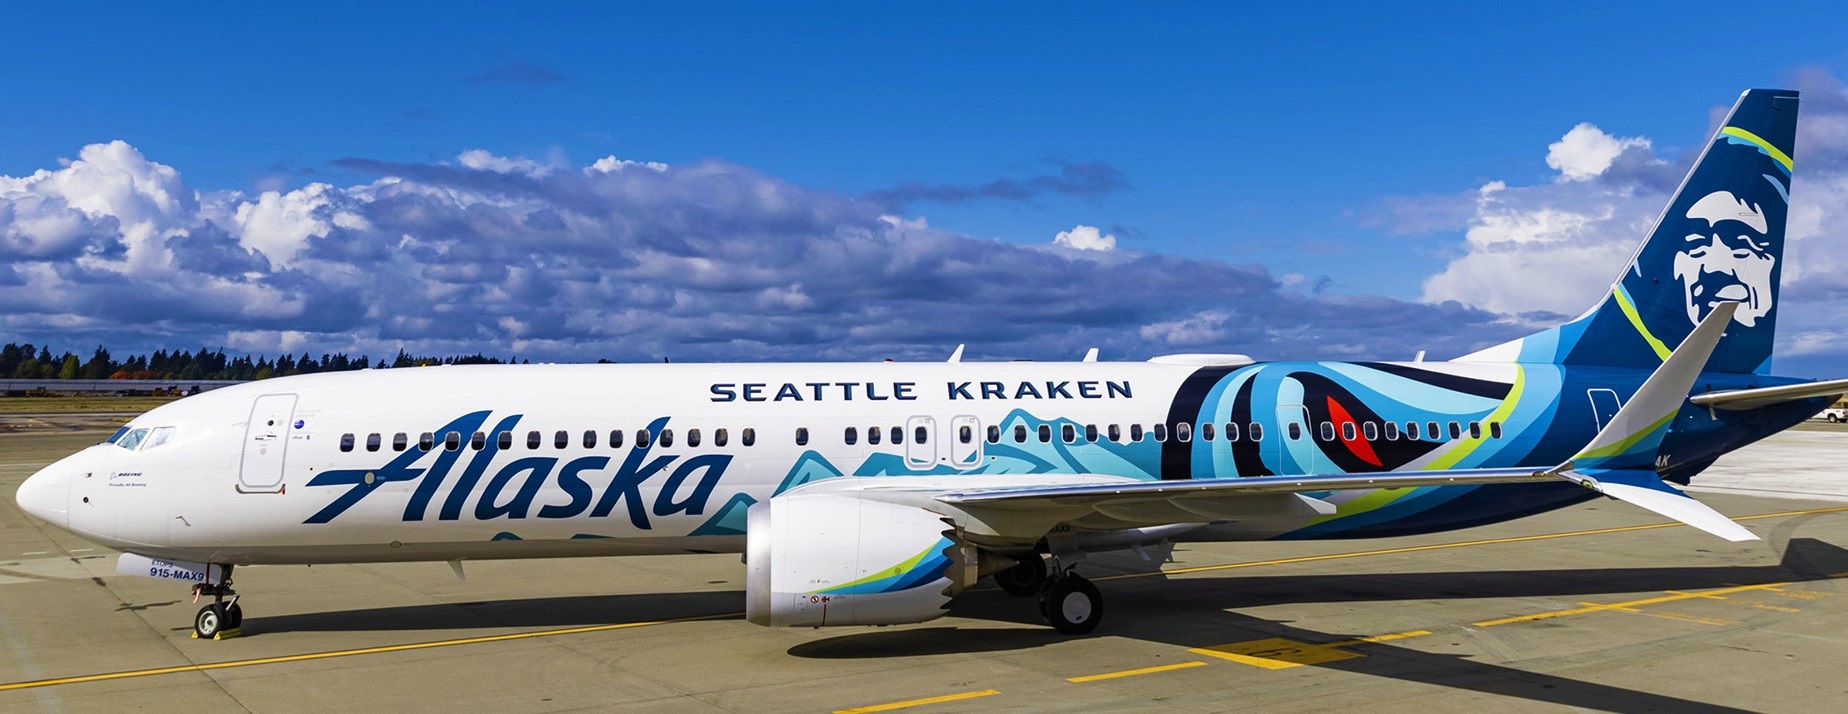 All Alaska Mainline and Subcarrier Flights Grounded - FAA Issues Groundstop For All Alaska Airlines Flights.